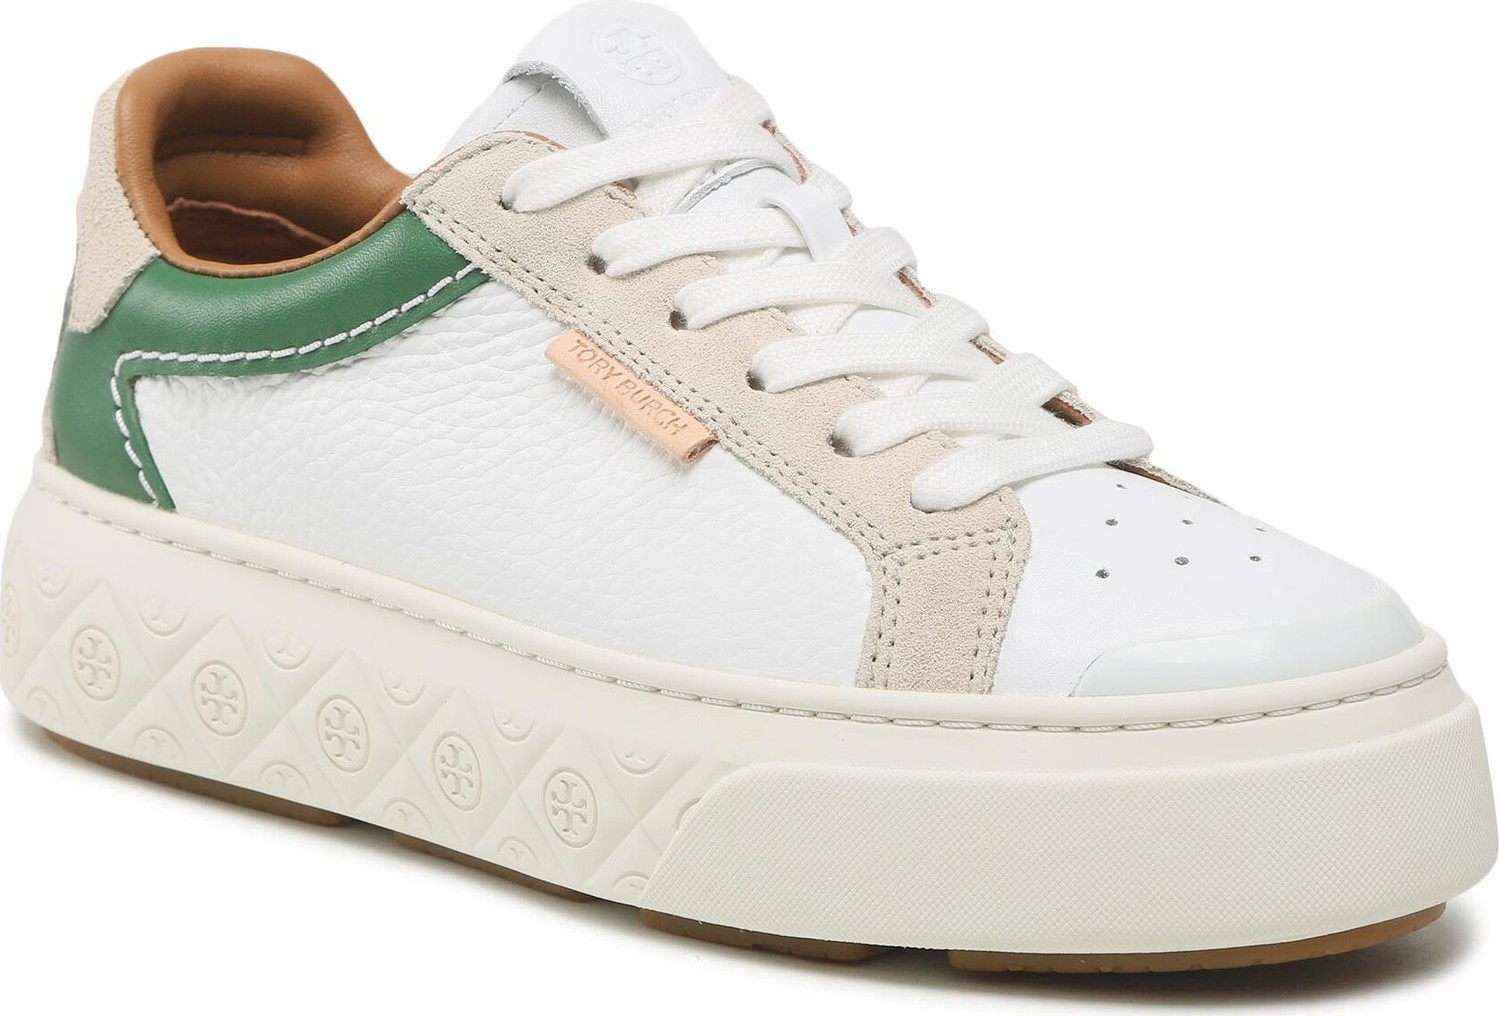 Sneakersy Tory Burch Ladybug Sneaker Adria 143066 White/Green/Frost 100